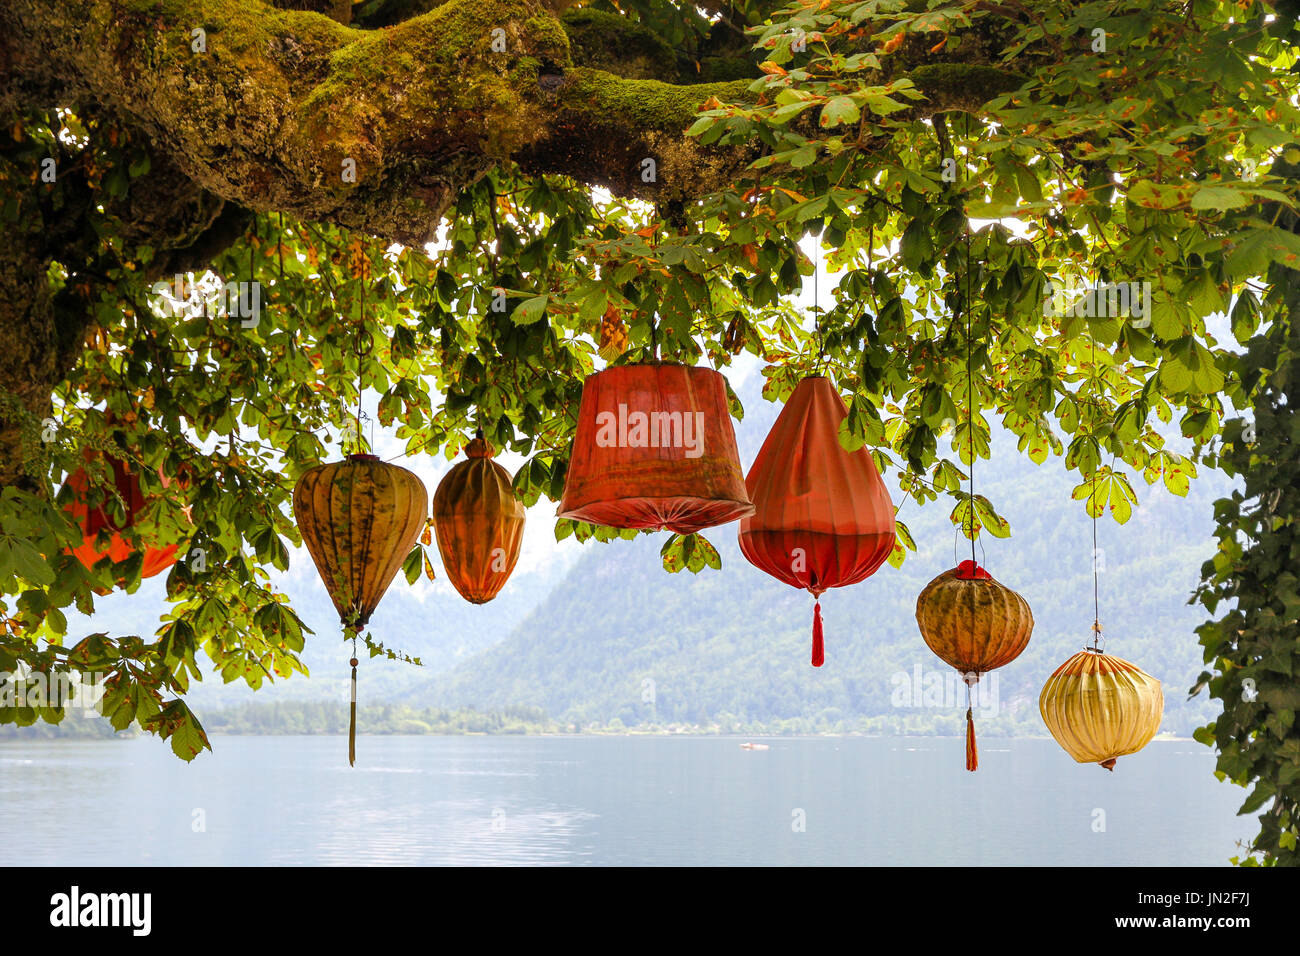 Traditional colorful Asian lanterns (common in China, Korea, Japan, Vietnam, Thailand) hanging below an old tree with green leaves against a lake. Stock Photo